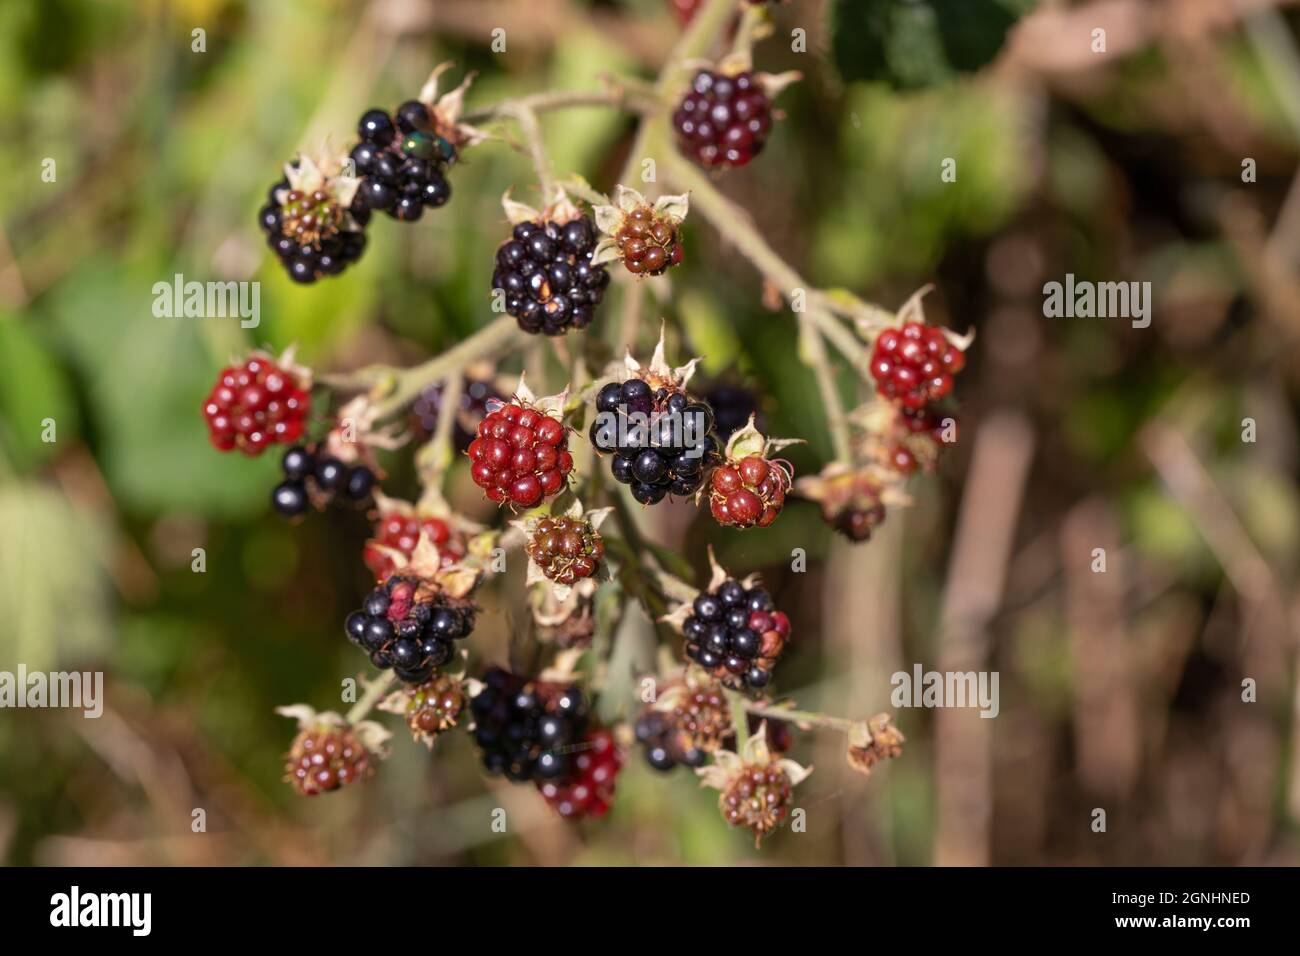 Blackberry, Blackberries, ripened, ripening (Rubus fruticosus). Fruits different stages of ripening. Colour attracts attention of frugivorous birds. Stock Photo